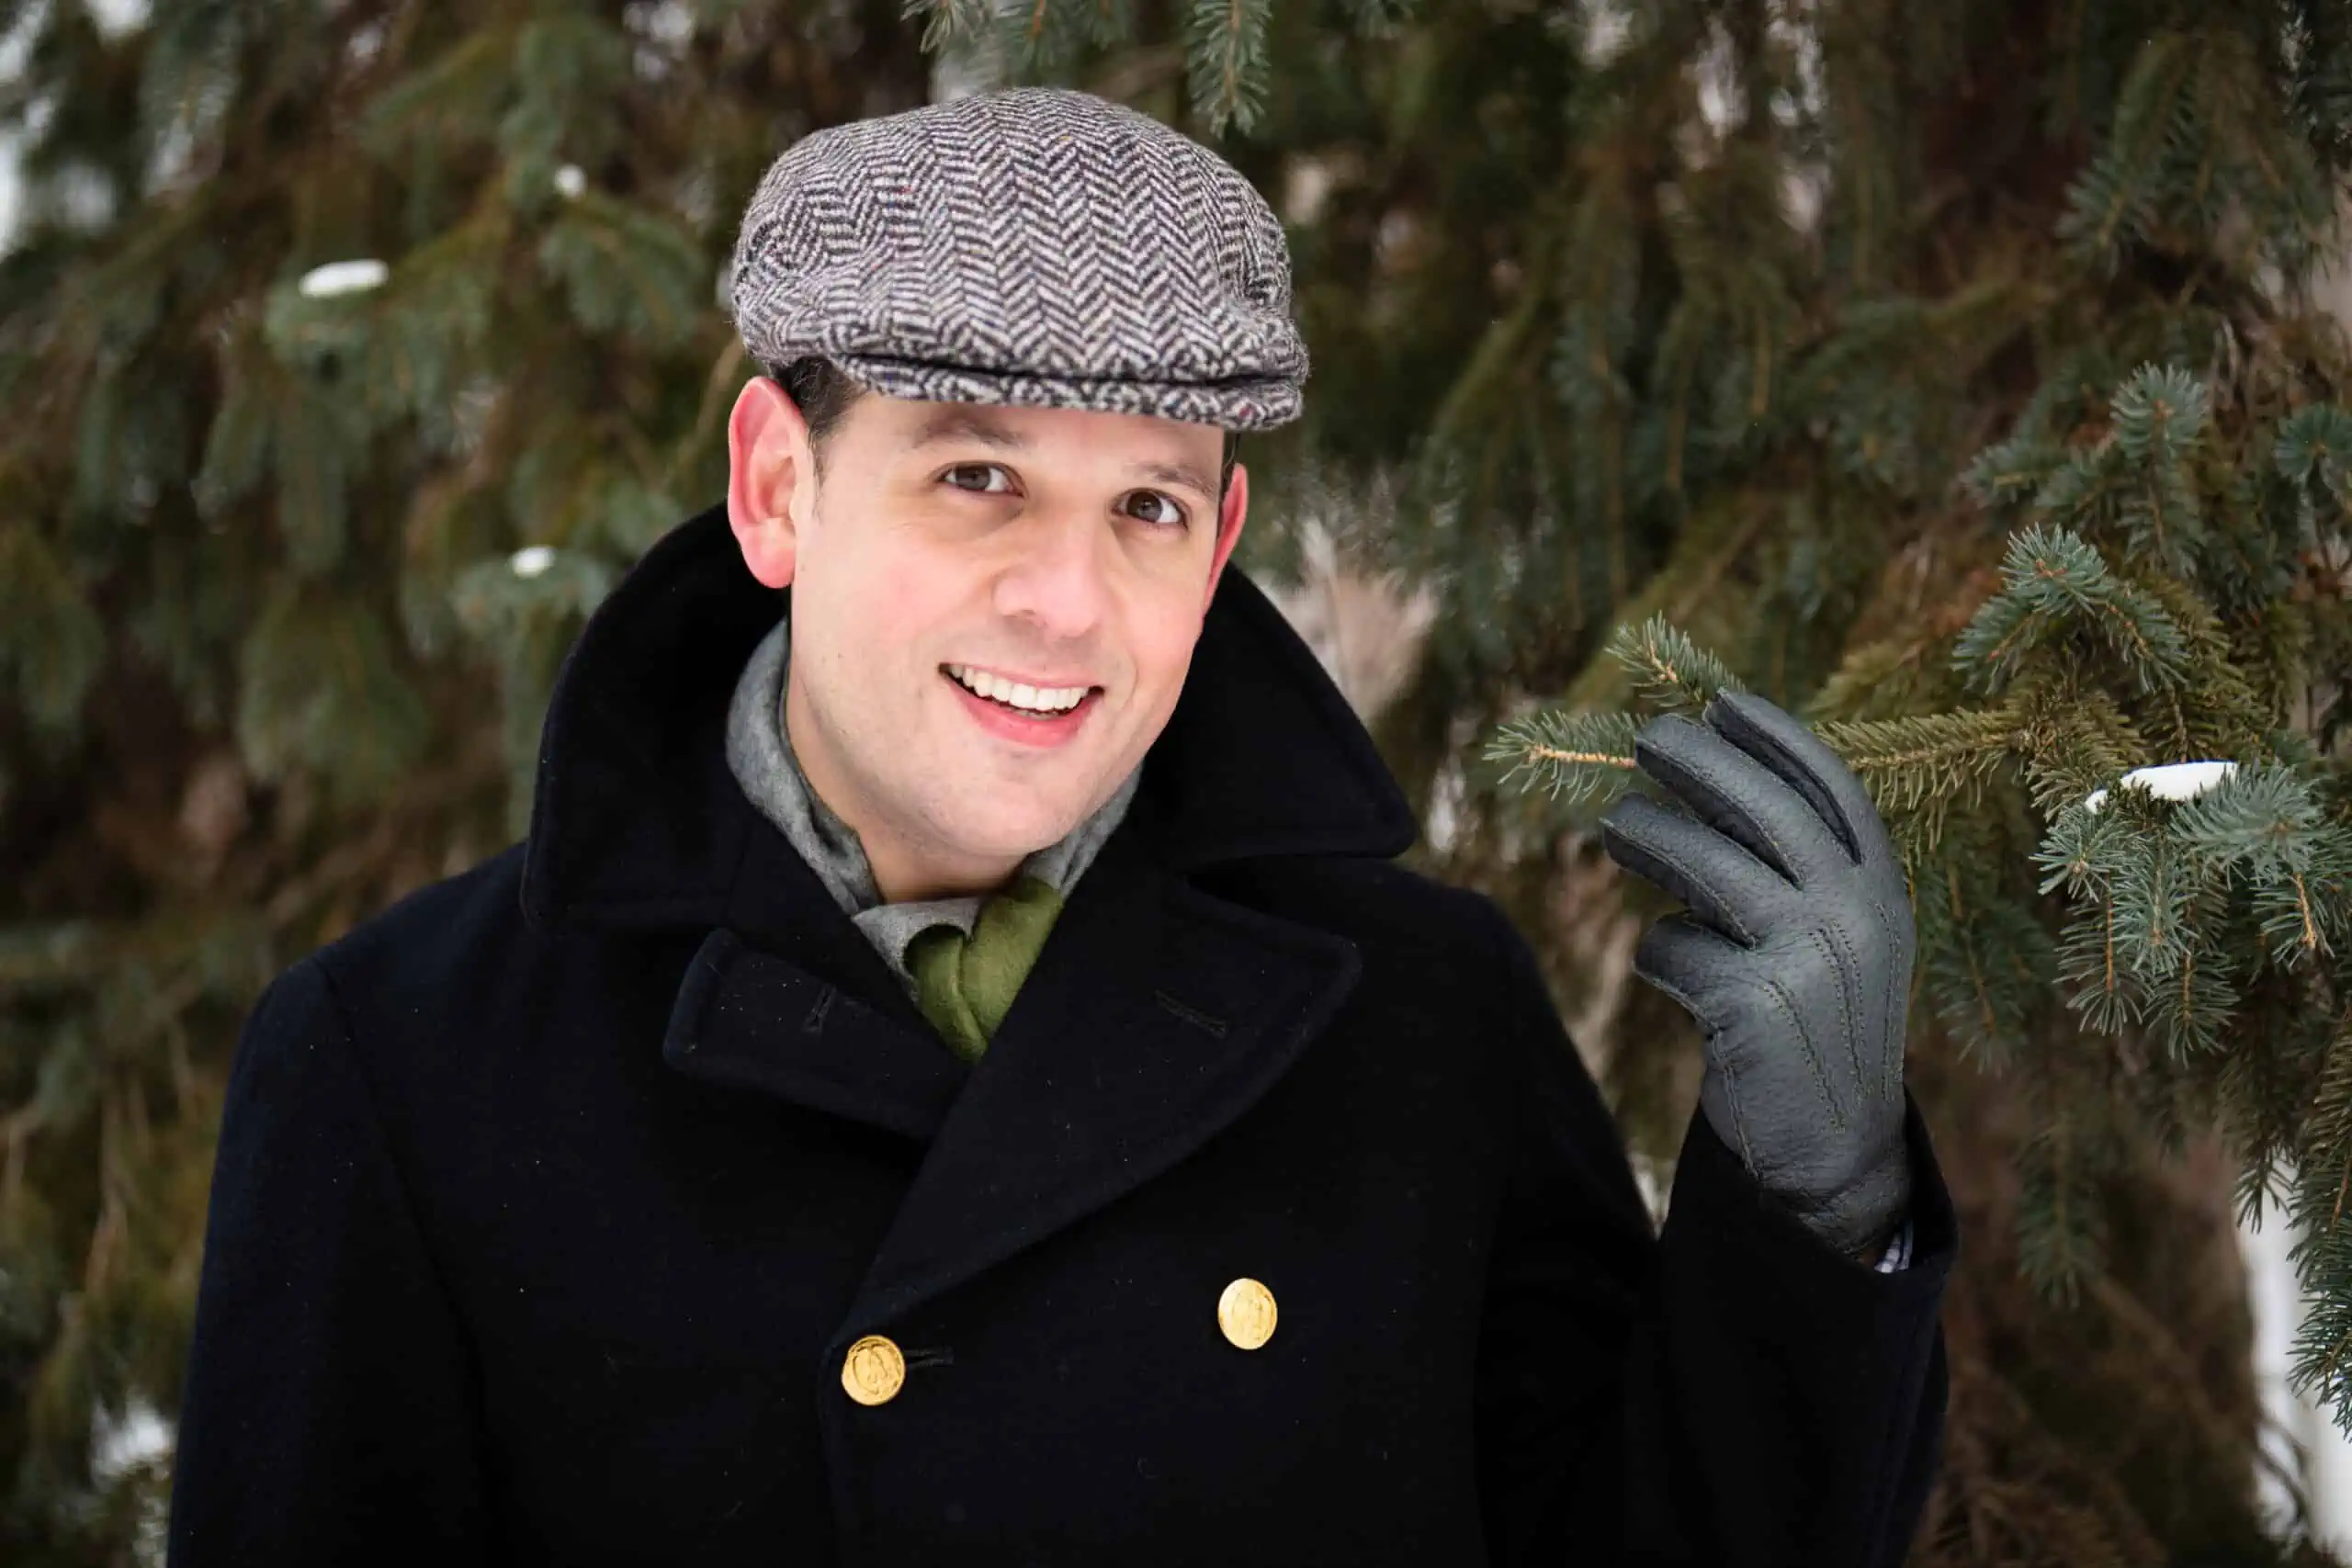 Raphael raises his hand while wearing a navy pea coat, flat cap, and grey gloves